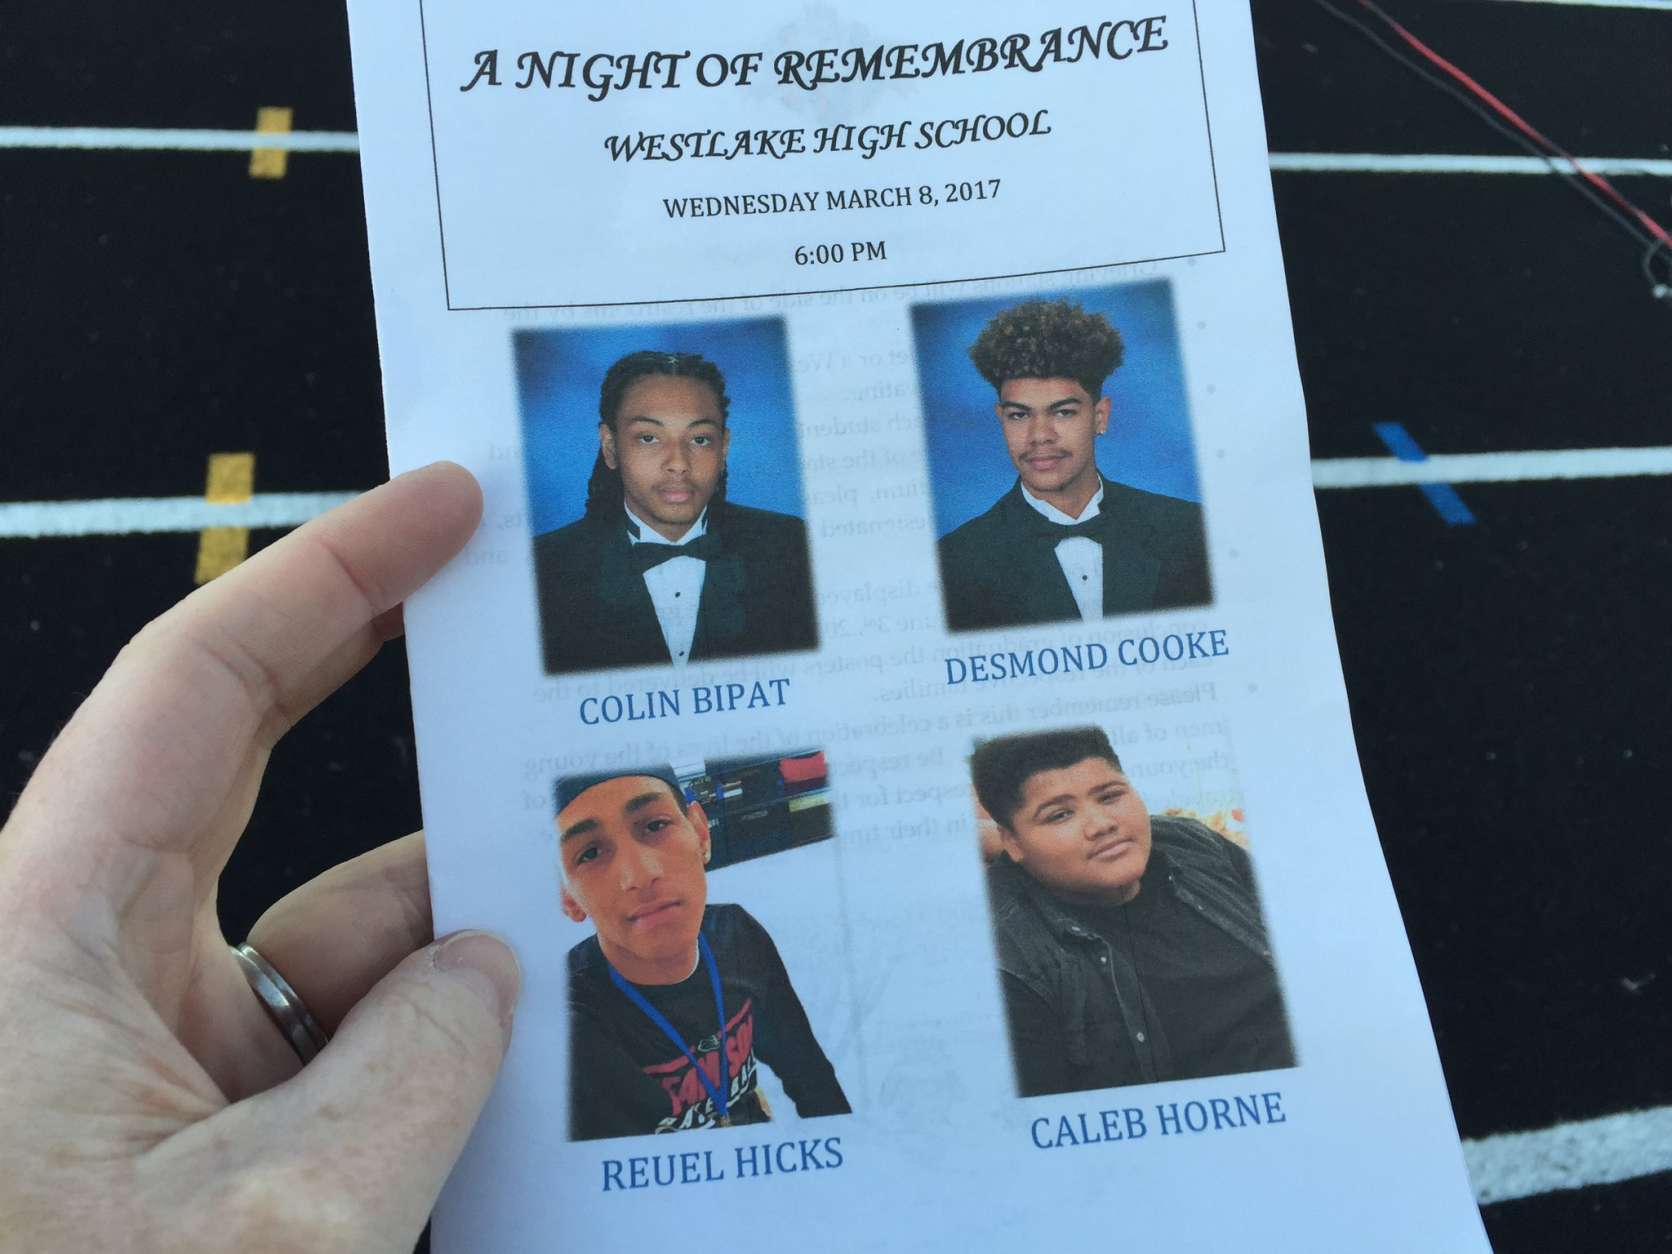 Four seniors from Westlake High School have passed away since July. They were remembered Wednesday. (WTOP/Michelle Basch)